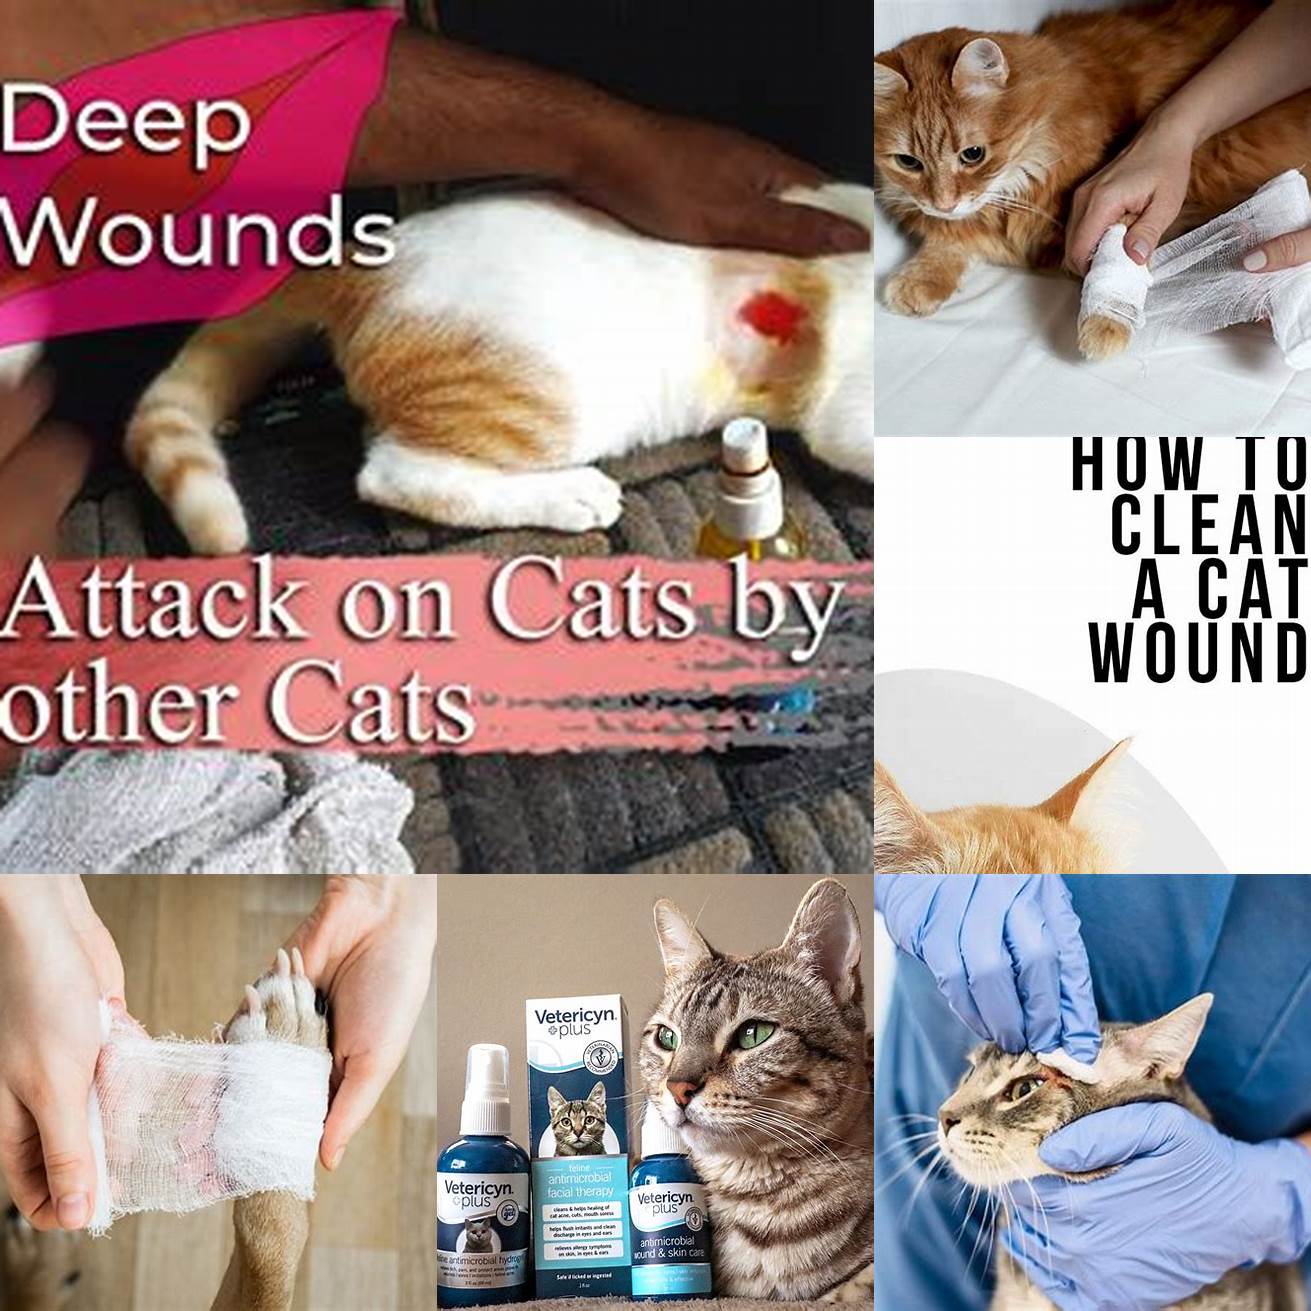 Clean the wound with soap and water